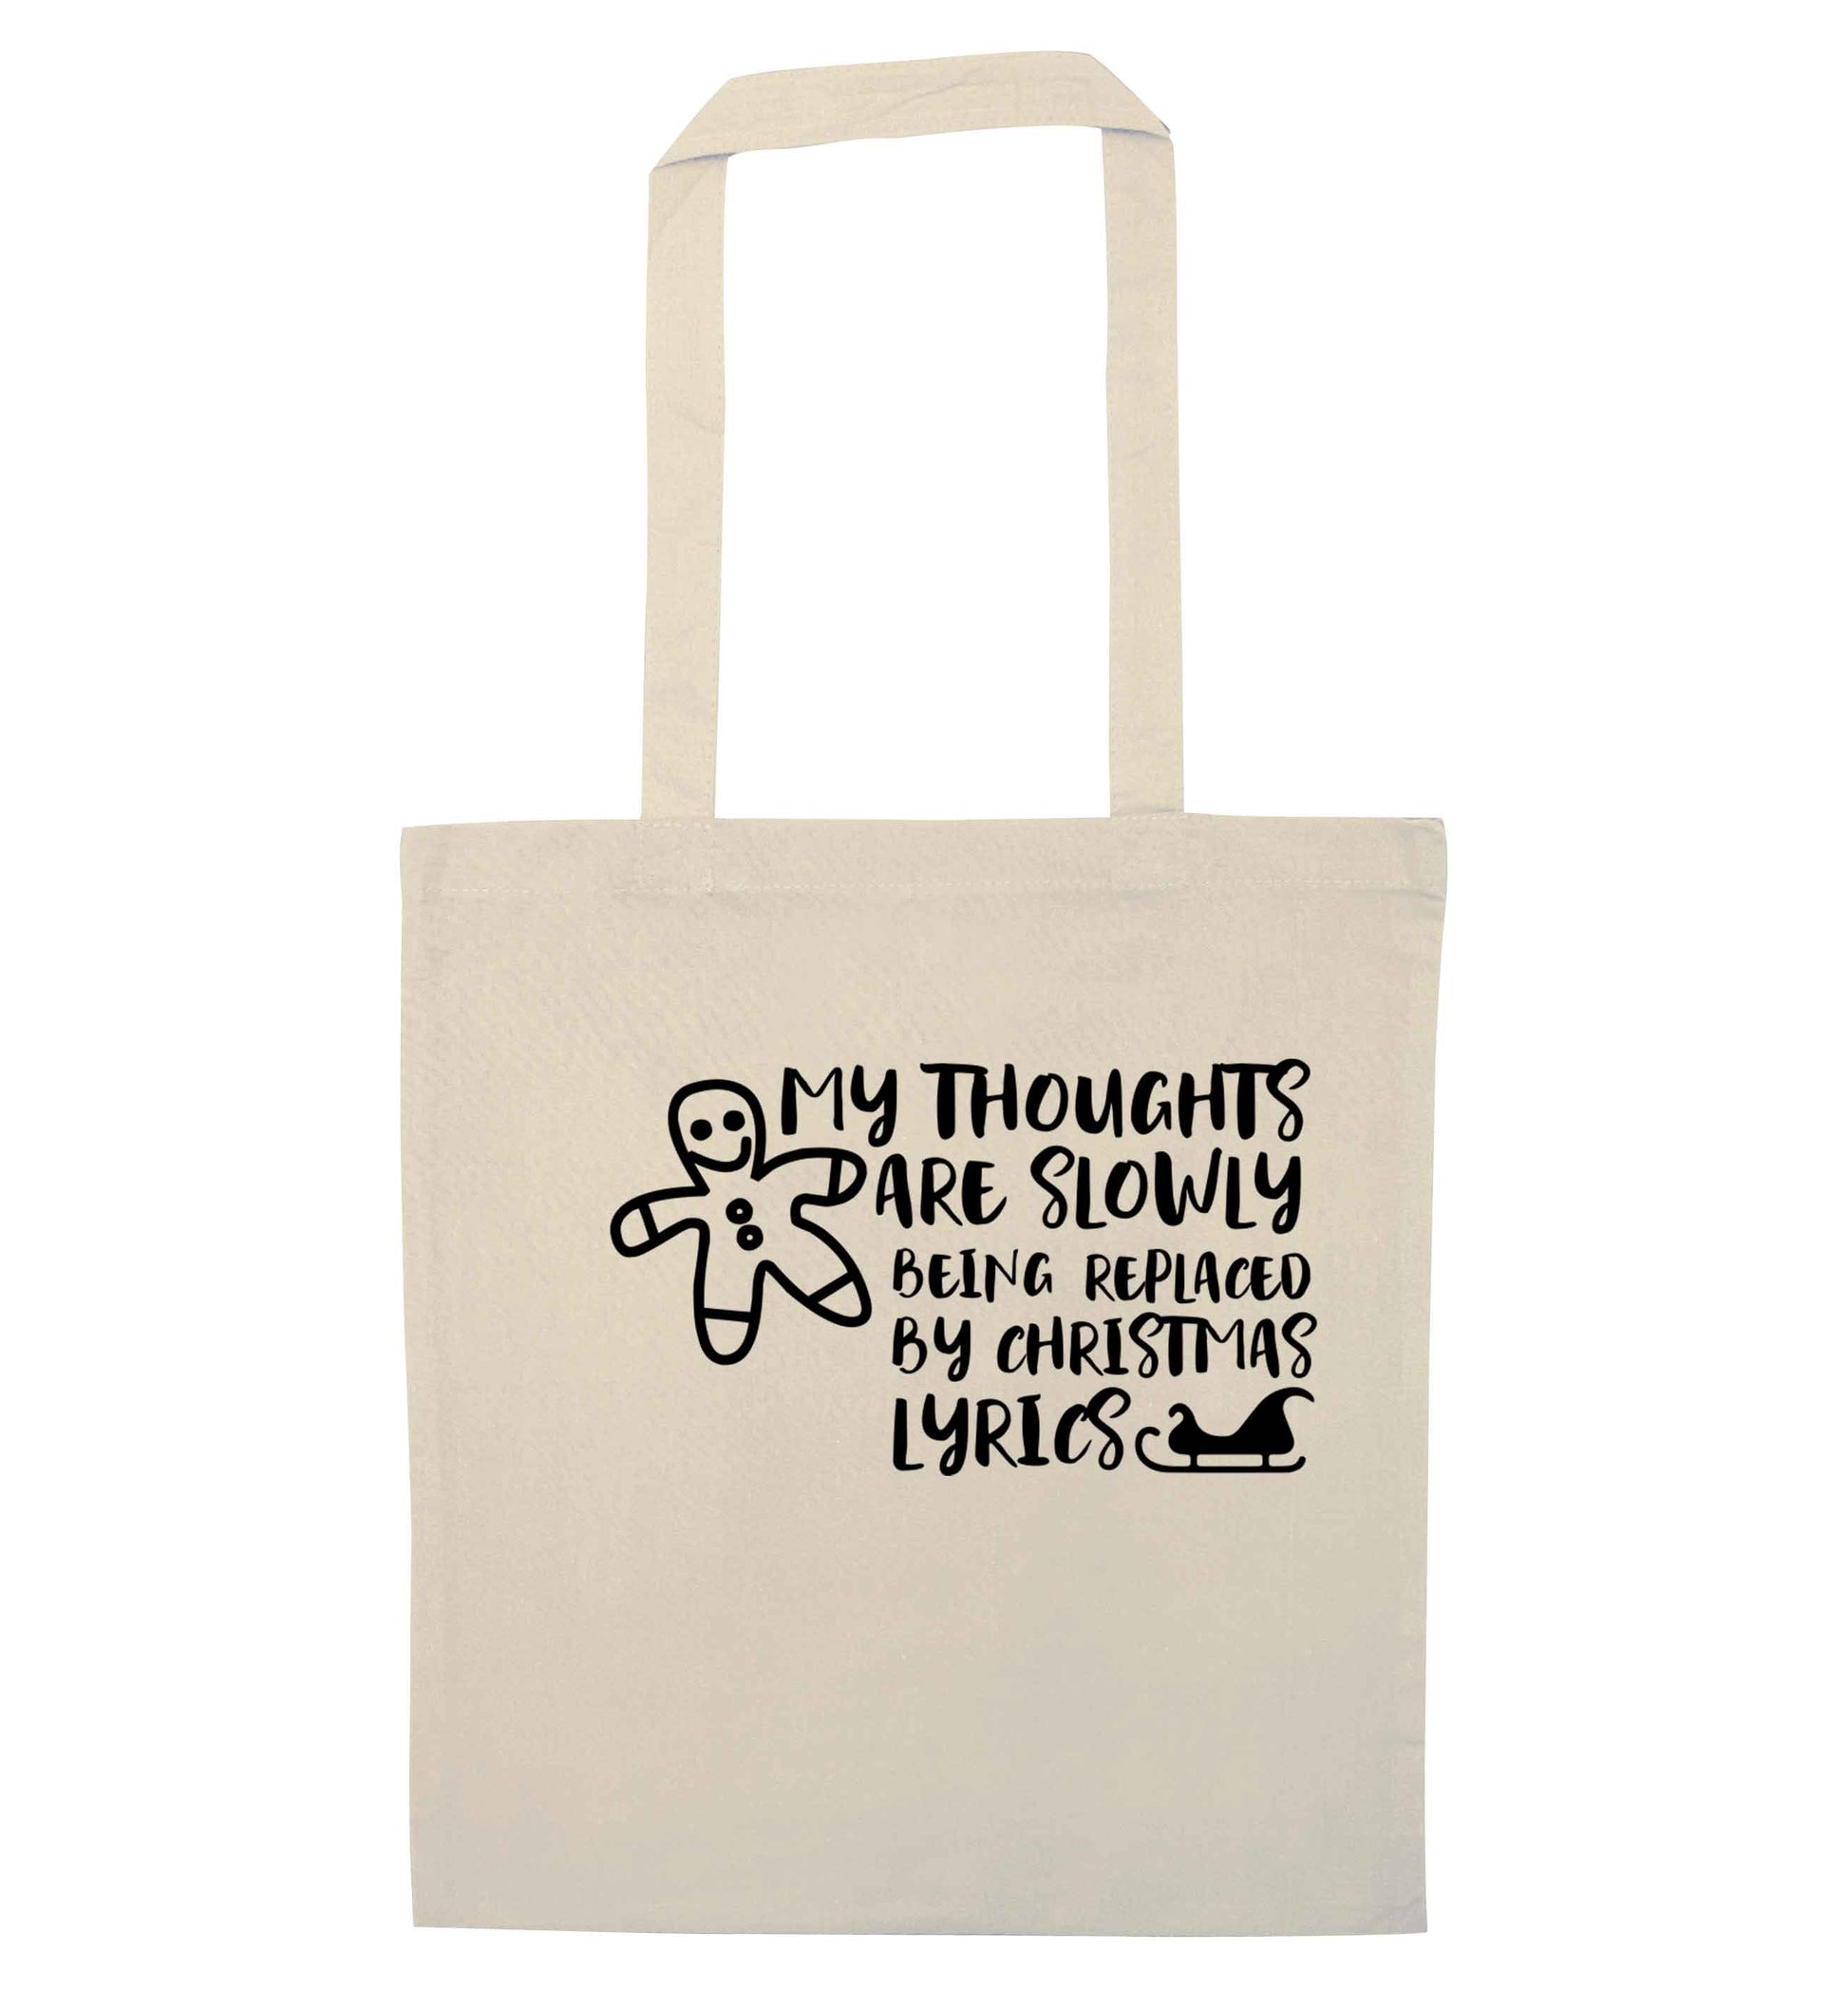 My thoughts are slowly being replaced by Christmas lyrics natural tote bag